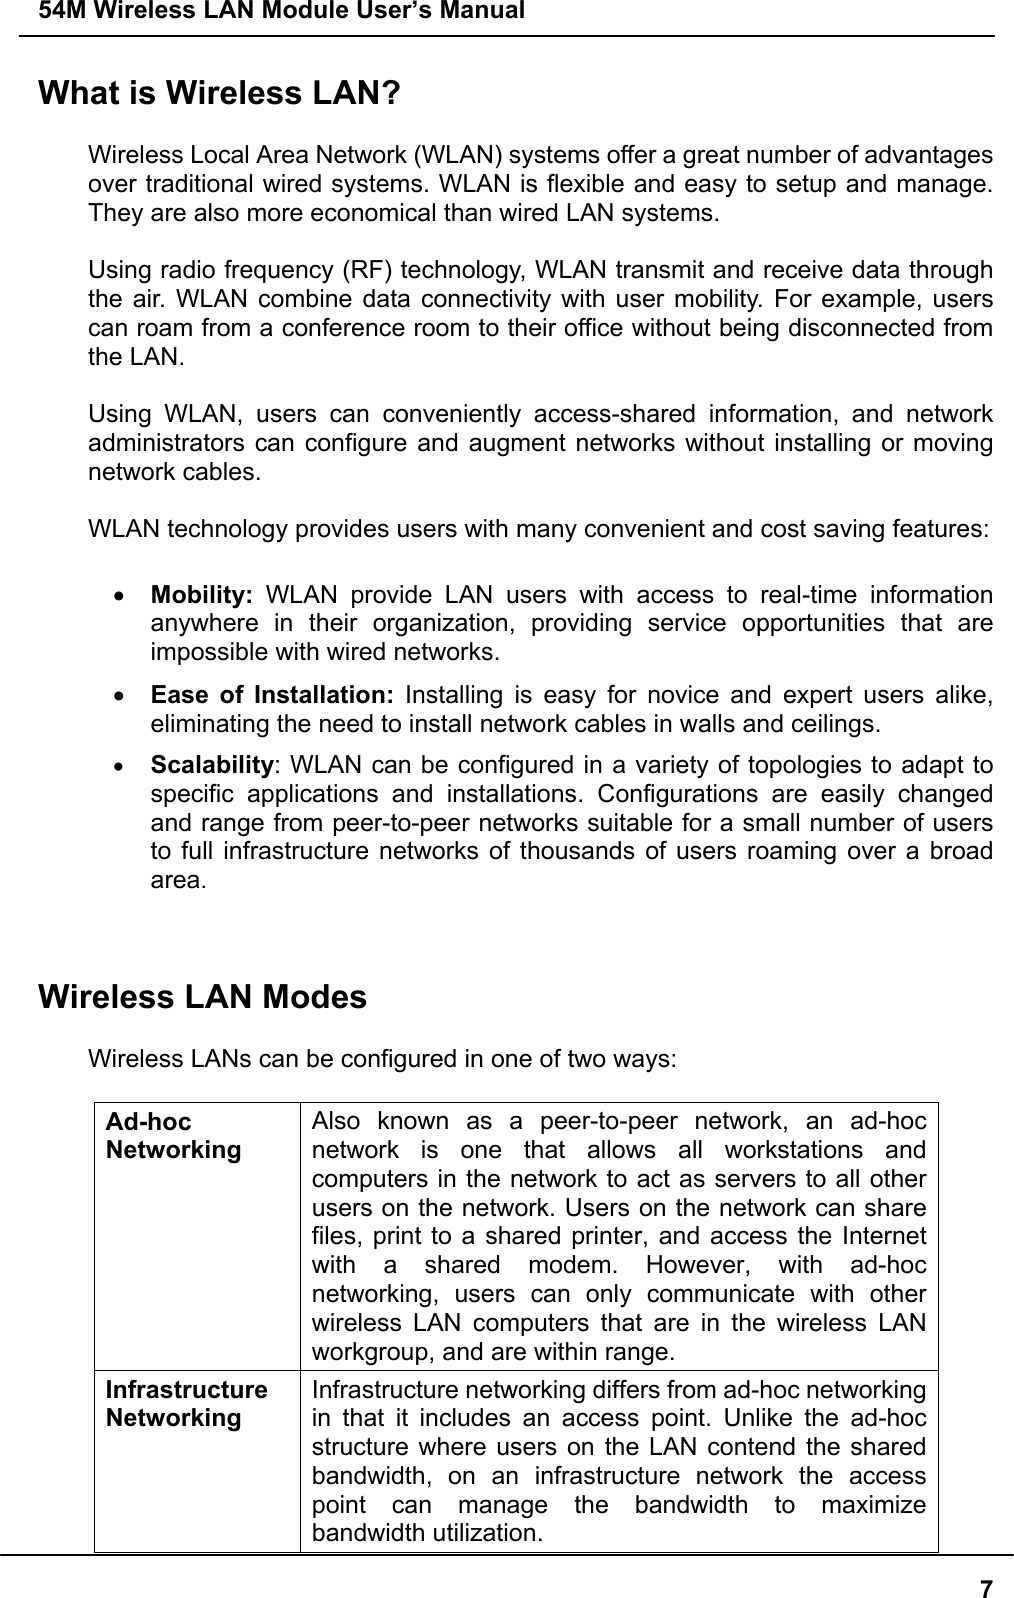 54M Wireless LAN Module User’s Manual7What is Wireless LAN?Wireless Local Area Network (WLAN) systems offer a great number of advantagesover traditional wired systems. WLAN is flexible and easy to setup and manage.They are also more economical than wired LAN systems.Using radio frequency (RF) technology, WLAN transmit and receive data throughthe air. WLAN combine data connectivity with user mobility. For example, userscan roam from a conference room to their office without being disconnected fromthe LAN.Using WLAN, users can conveniently access-shared information, and networkadministrators can configure and augment networks without installing or movingnetwork cables.WLAN technology provides users with many convenient and cost saving features:• Mobility: WLAN provide LAN users with access to real-time informationanywhere in their organization, providing service opportunities that areimpossible with wired networks.• Ease of Installation: Installing is easy for novice and expert users alike,eliminating the need to install network cables in walls and ceilings.• Scalability: WLAN can be configured in a variety of topologies to adapt tospecific applications and installations. Configurations are easily changedand range from peer-to-peer networks suitable for a small number of usersto full infrastructure networks of thousands of users roaming over a broadarea.Wireless LAN ModesWireless LANs can be configured in one of two ways:Ad-hocNetworkingAlso known as a peer-to-peer network, an ad-hocnetwork is one that allows all workstations andcomputers in the network to act as servers to all otherusers on the network. Users on the network can sharefiles, print to a shared printer, and access the Internetwith a shared modem. However, with ad-hocnetworking, users can only communicate with otherwireless LAN computers that are in the wireless LANworkgroup, and are within range.InfrastructureNetworkingInfrastructure networking differs from ad-hoc networkingin that it includes an access point. Unlike the ad-hocstructure where users on the LAN contend the sharedbandwidth, on an infrastructure network the accesspoint can manage the bandwidth to maximizebandwidth utilization.